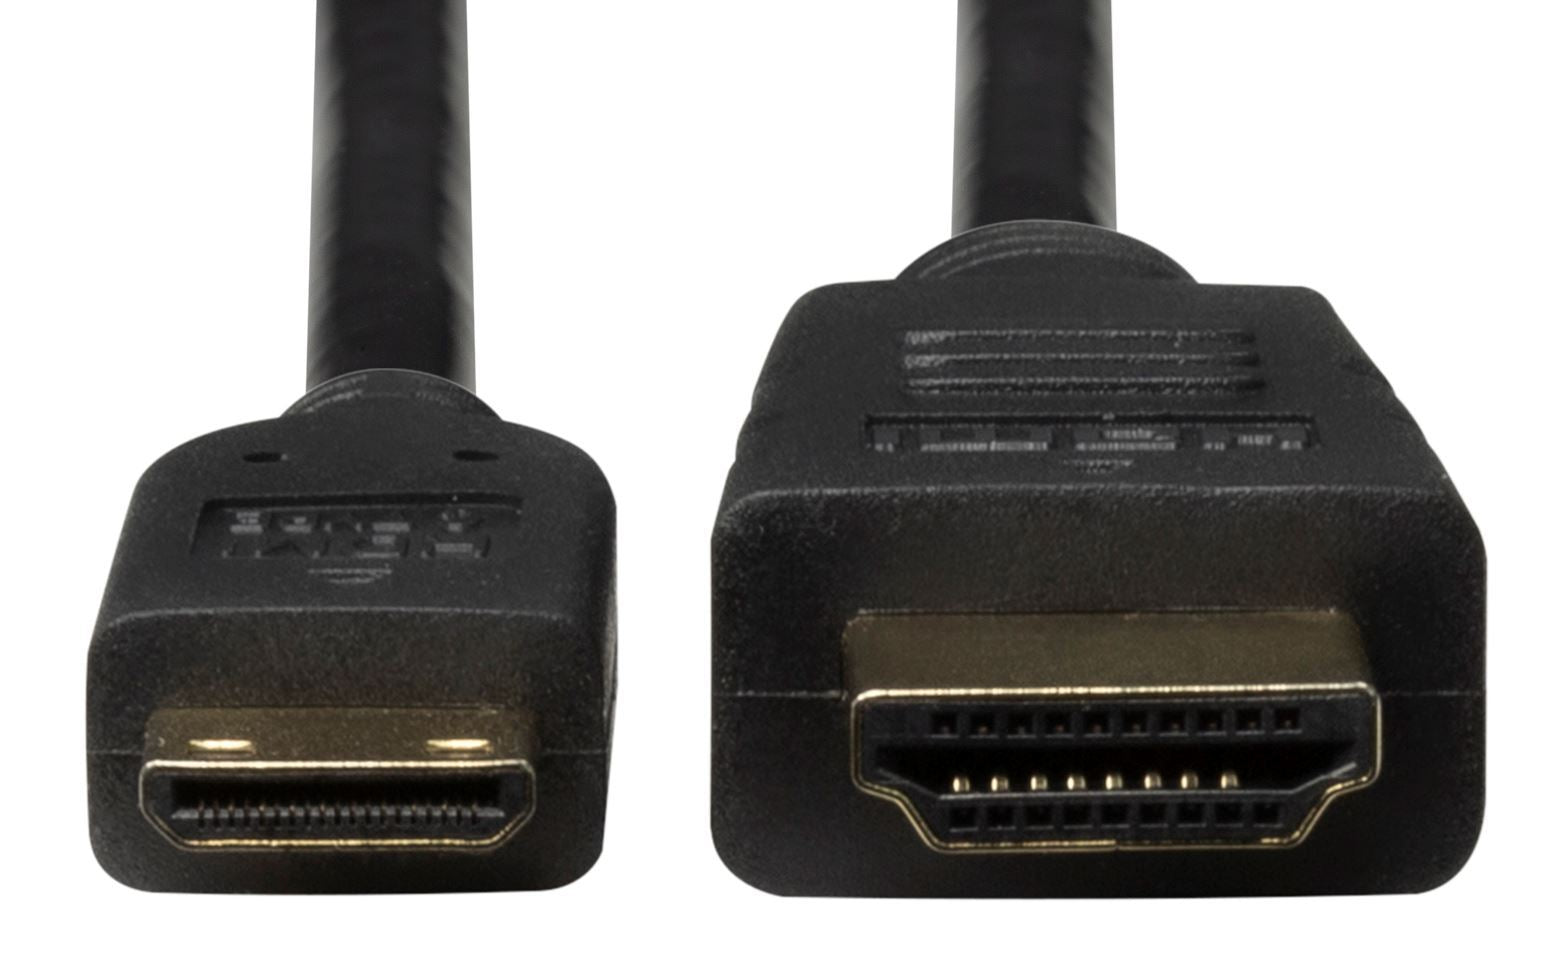 DYNAMIX_5m_HDMI_to_HDMI_Mini_Cable_High-Speed_with_Ethernet_Max_Res:_4K@60Hz_(3840x2160) 670